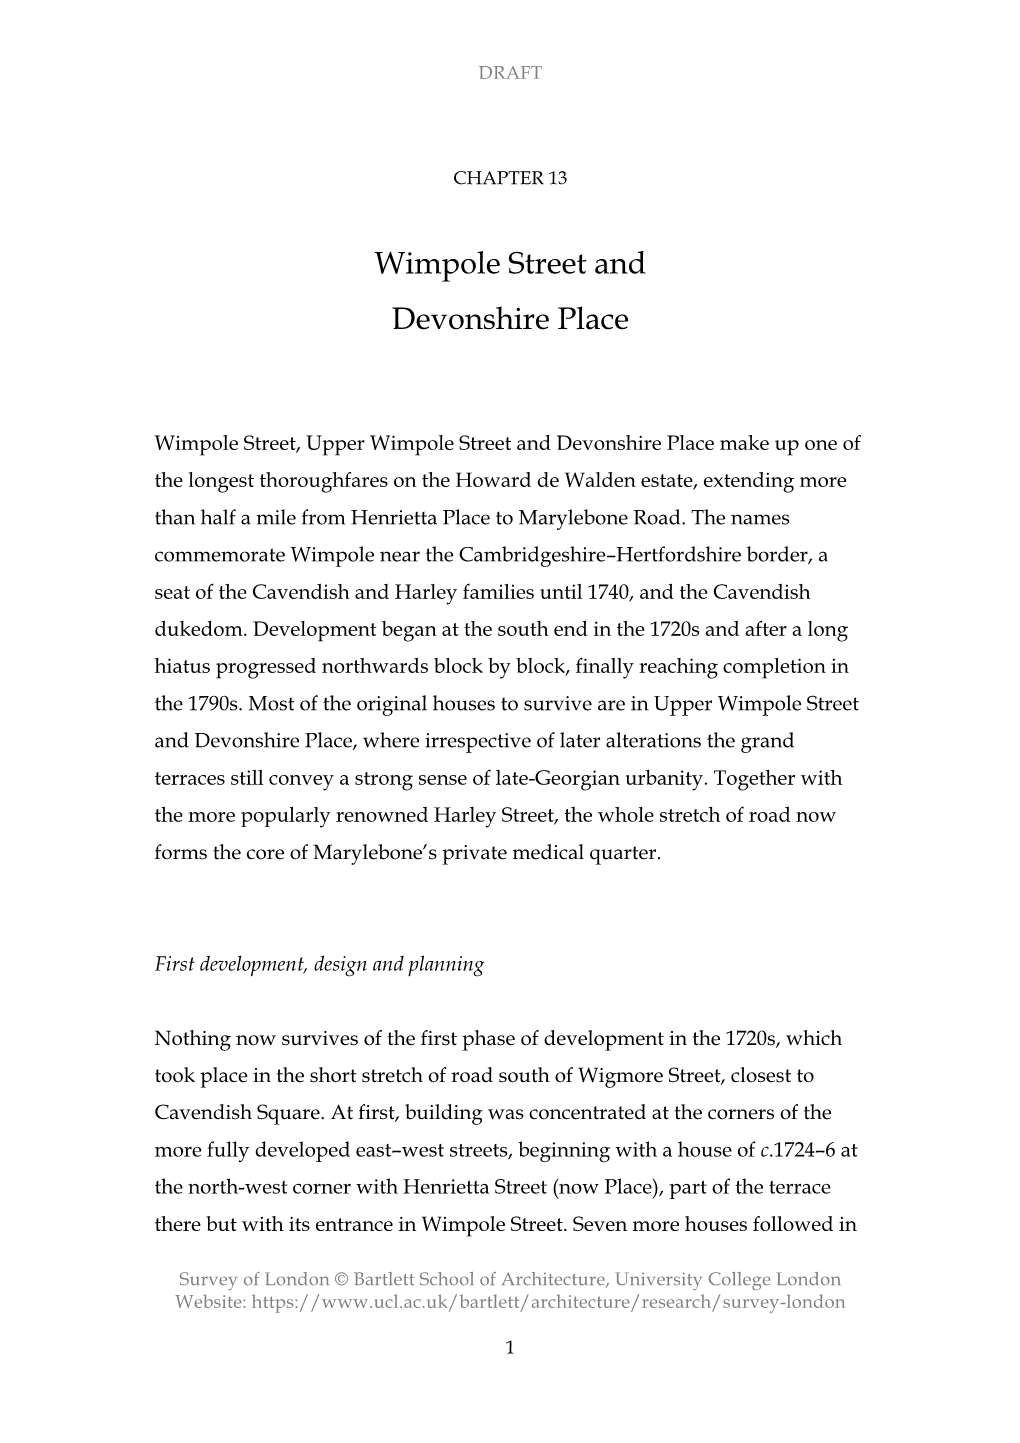 Chapter 13: Wimpole Street and Devonshire Place